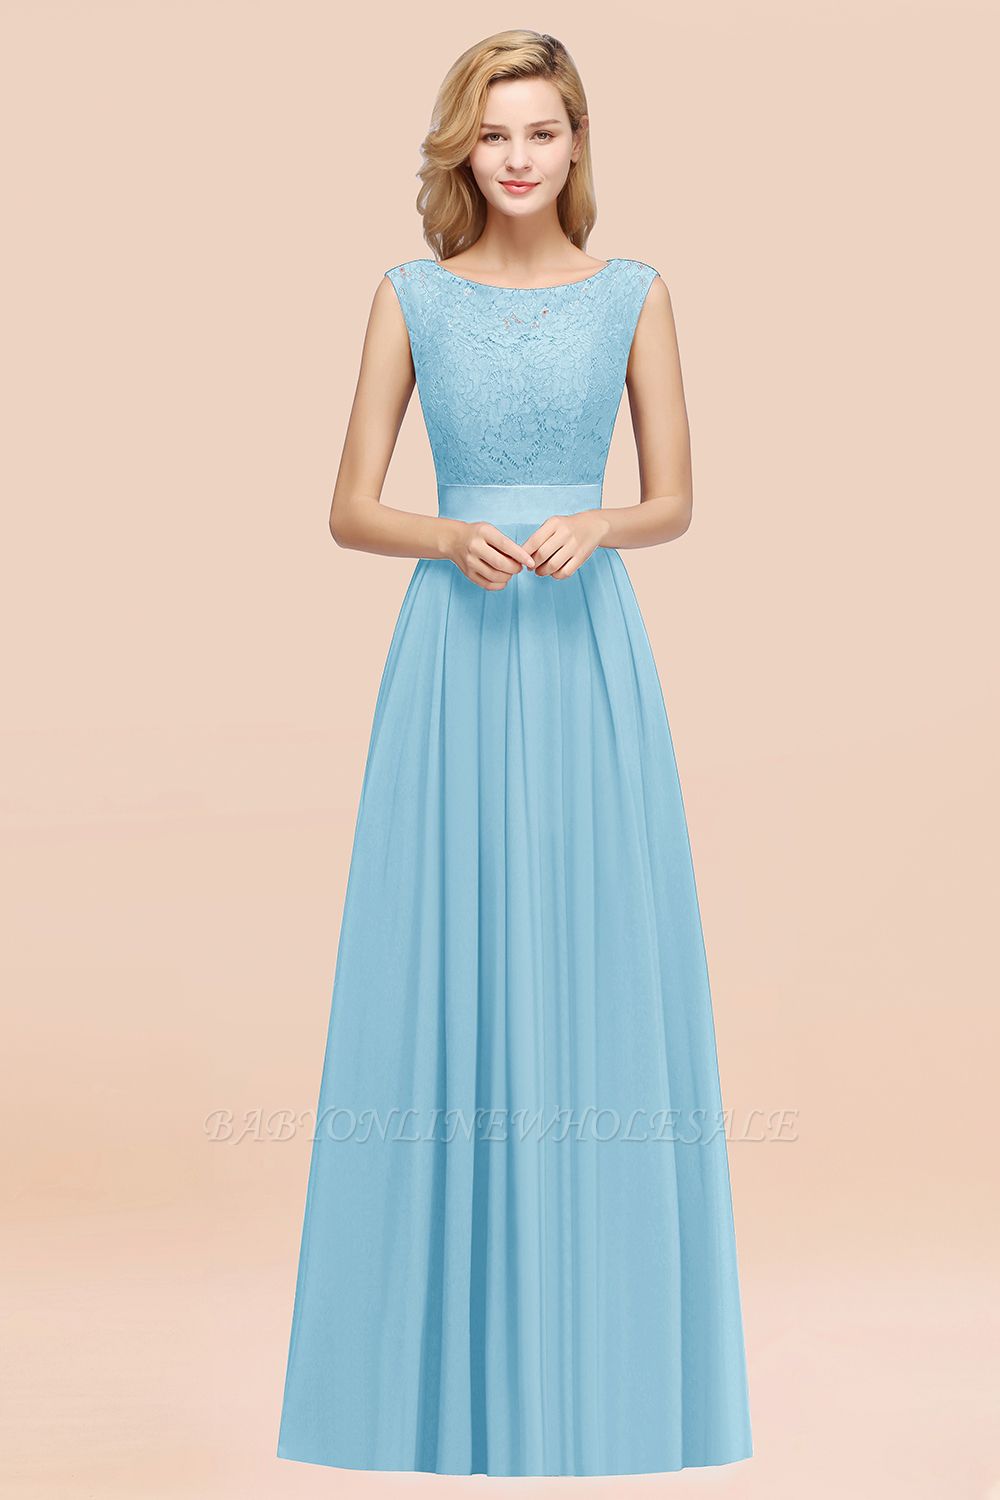 Sky blue cap sleeves lace bridesmaid dress with belt